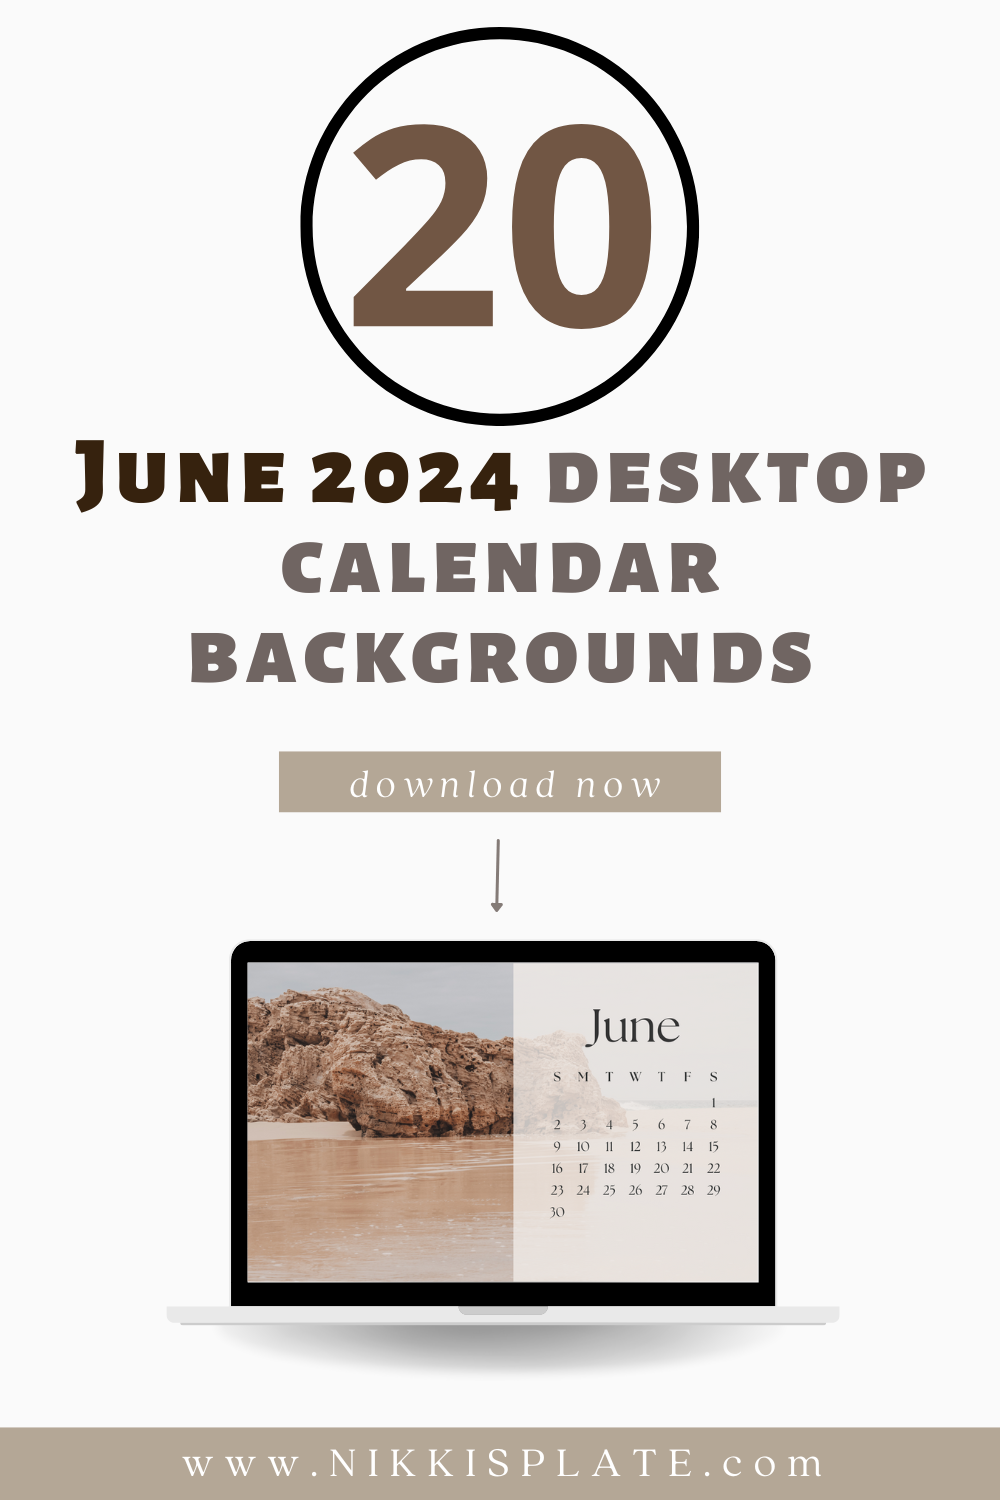 Free June 2024 Desktop Calendar Backgrounds; Here are your free June backgrounds for computers and laptops. Tech freebies for this month!